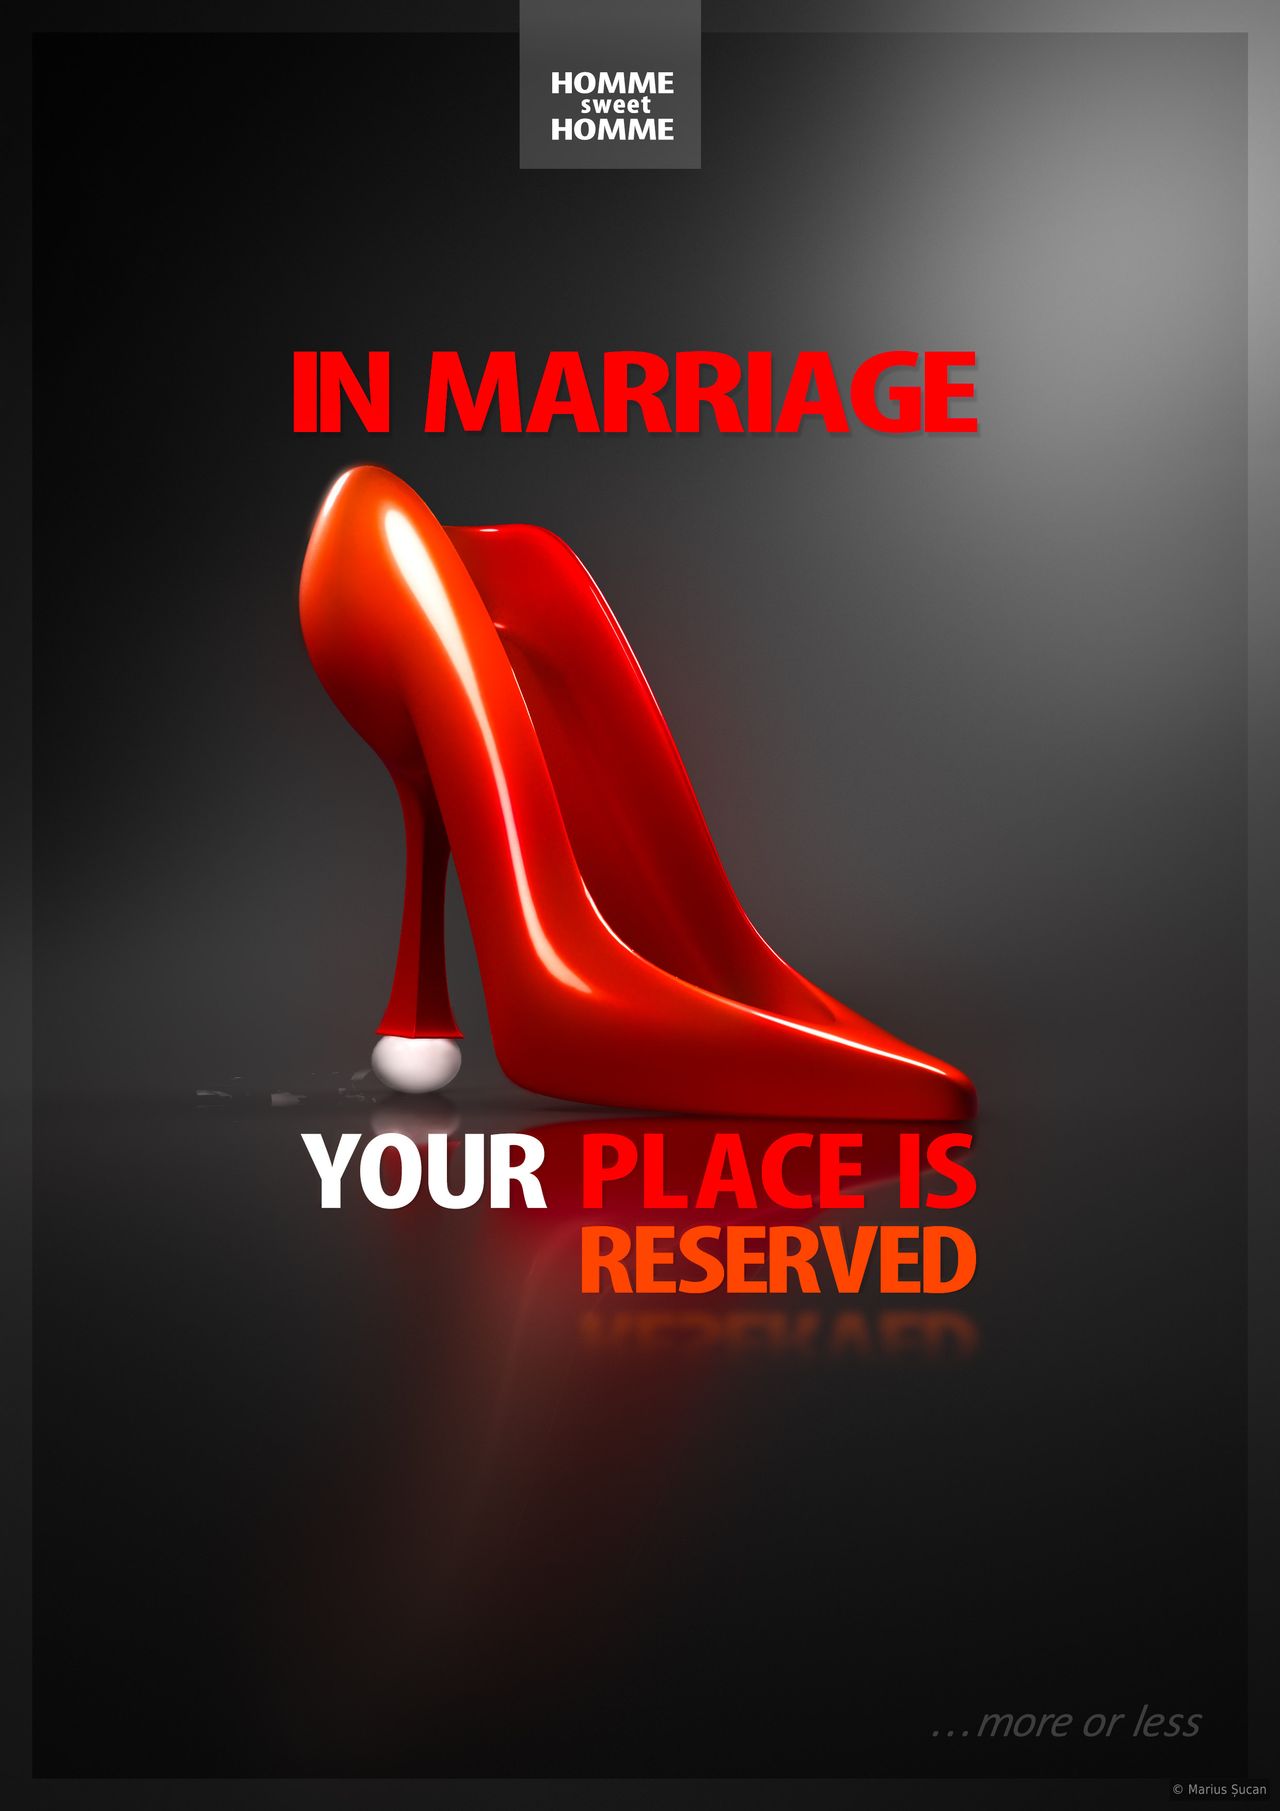 The place in marriage